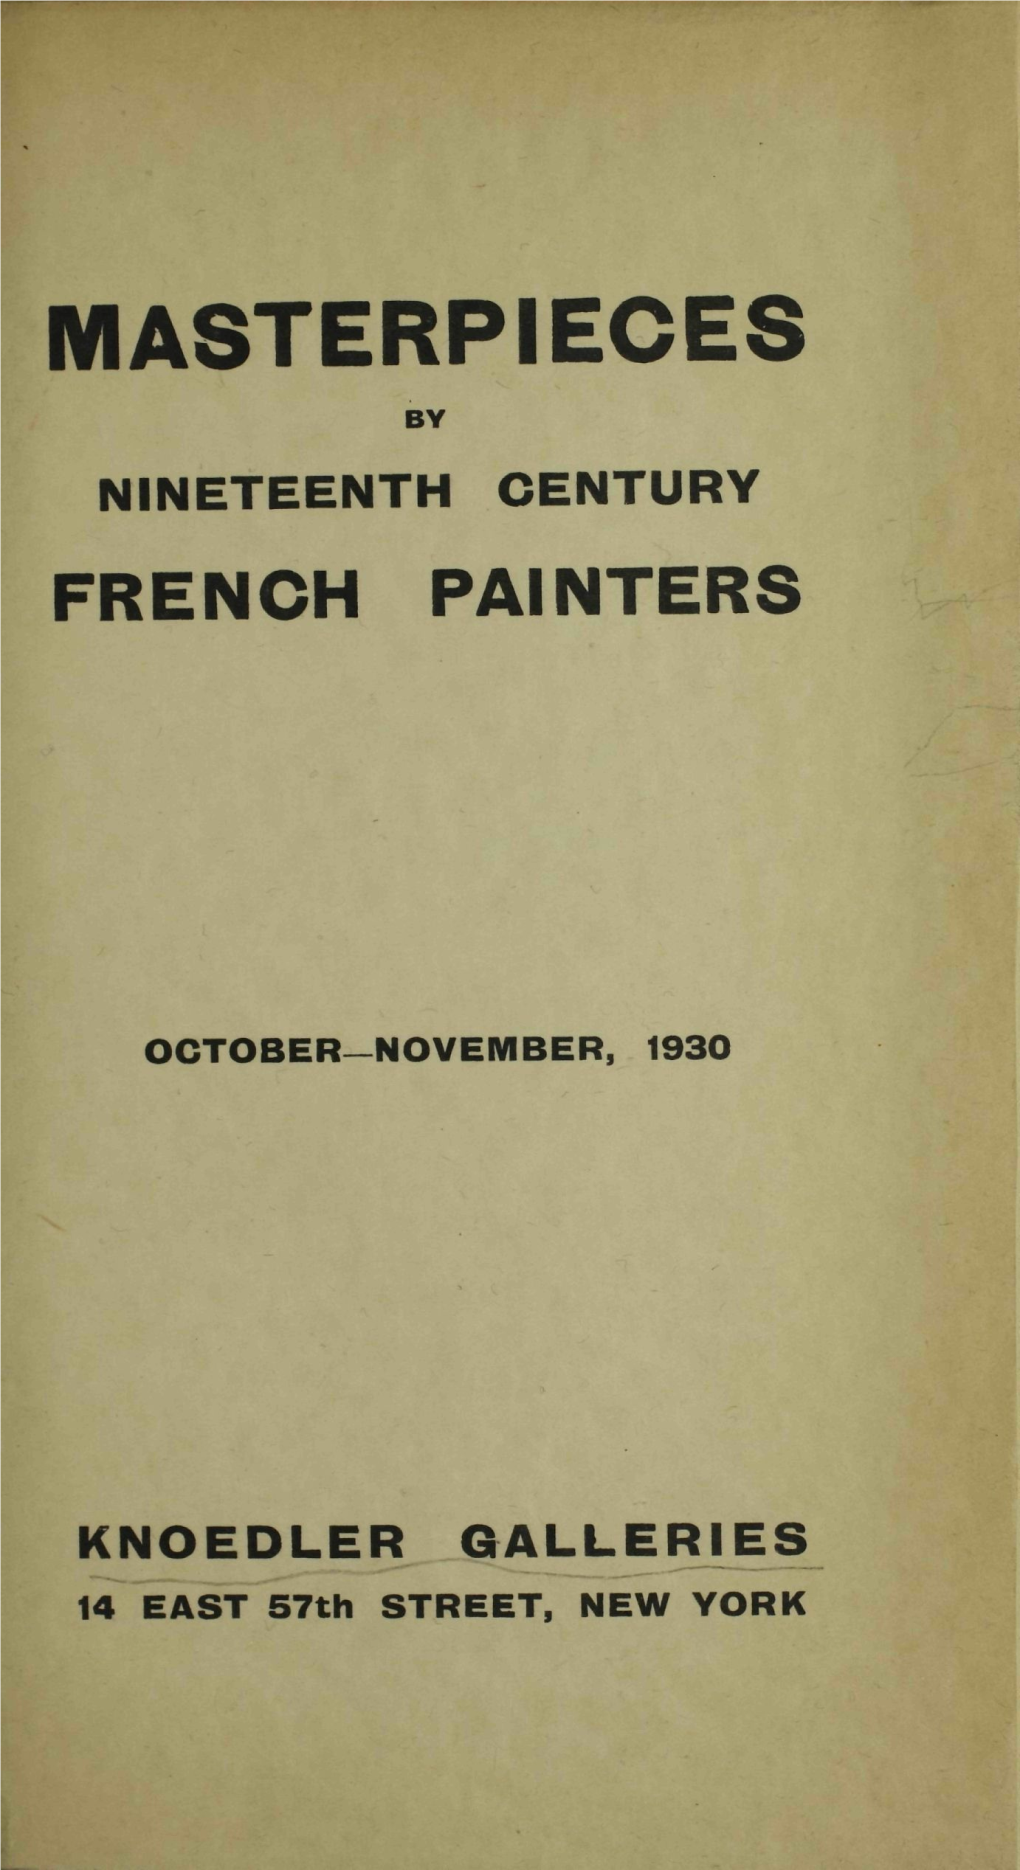 Masterpieces by Nineteenth Century French Painters : [Catalogue of the Exhibition at The] Knoedler Galleries, October-November